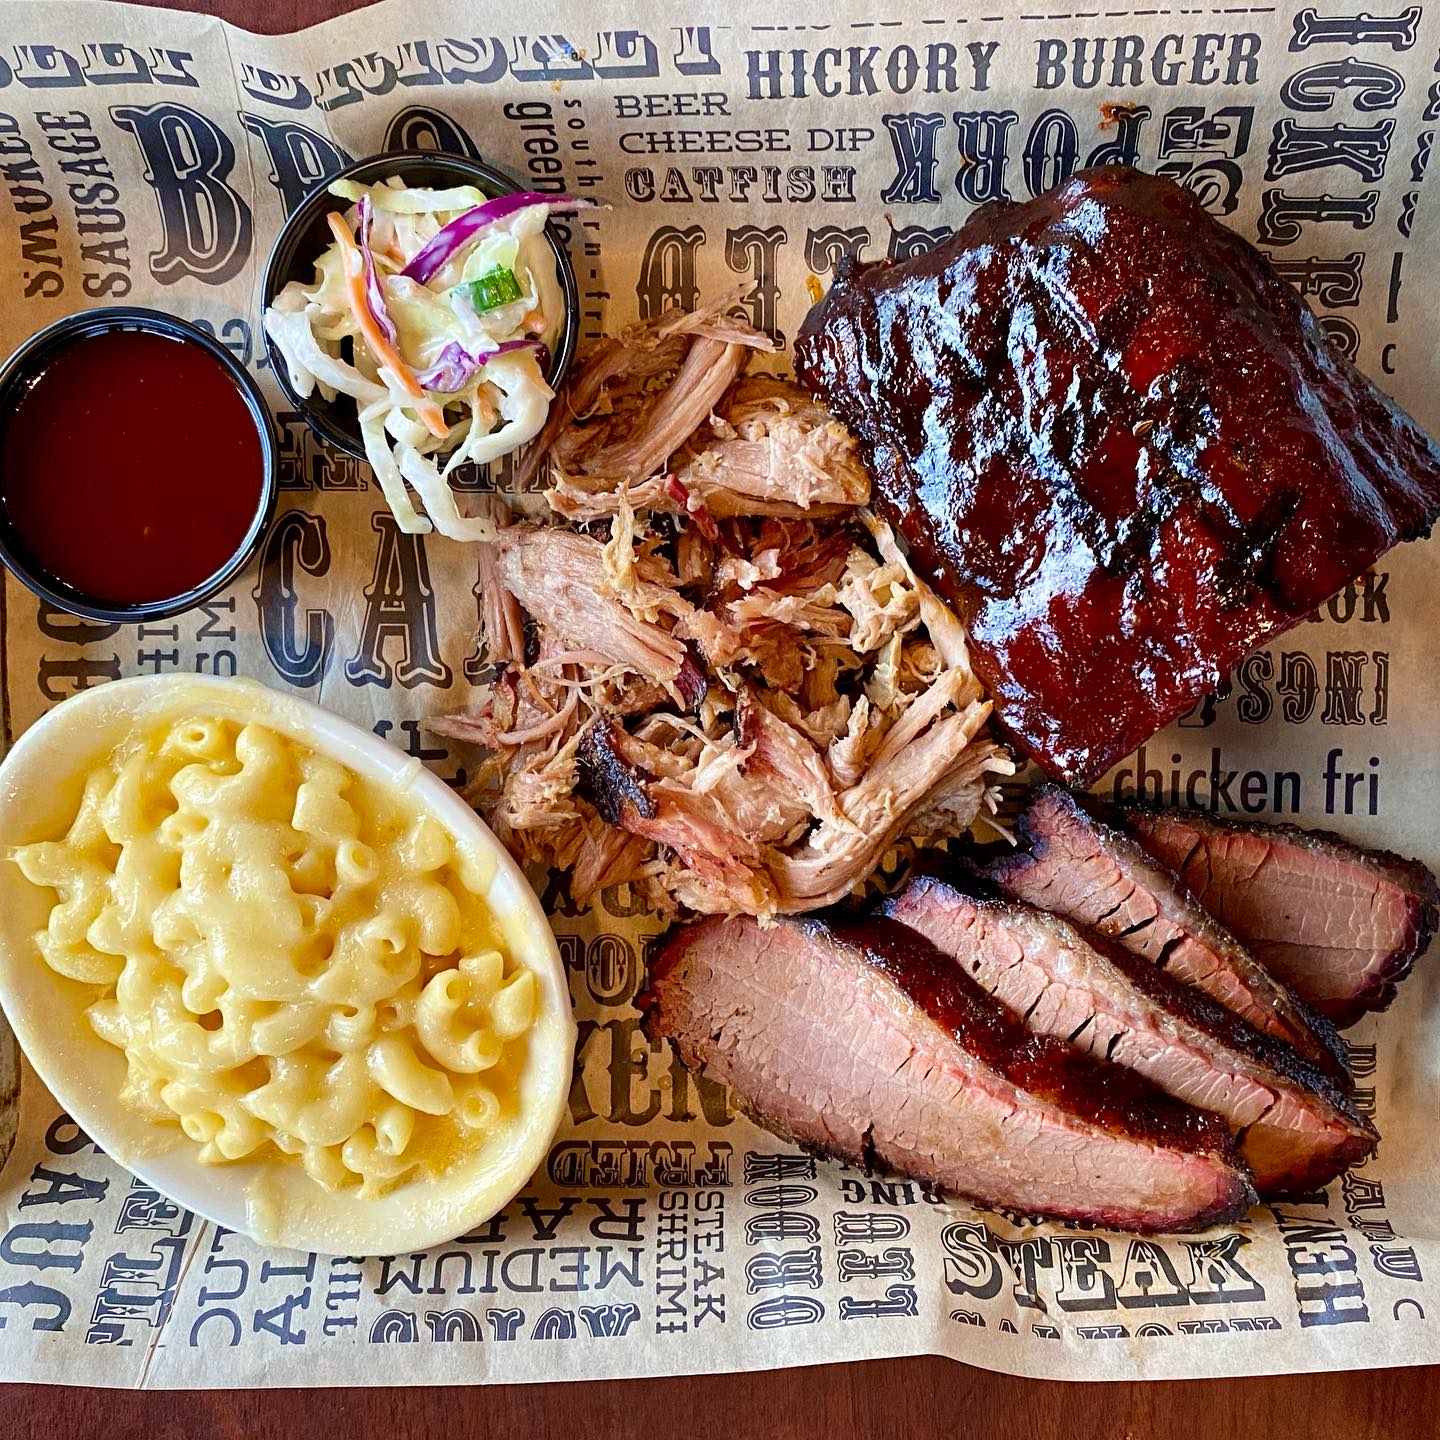 A tray of ribs, macaroni and cheese.